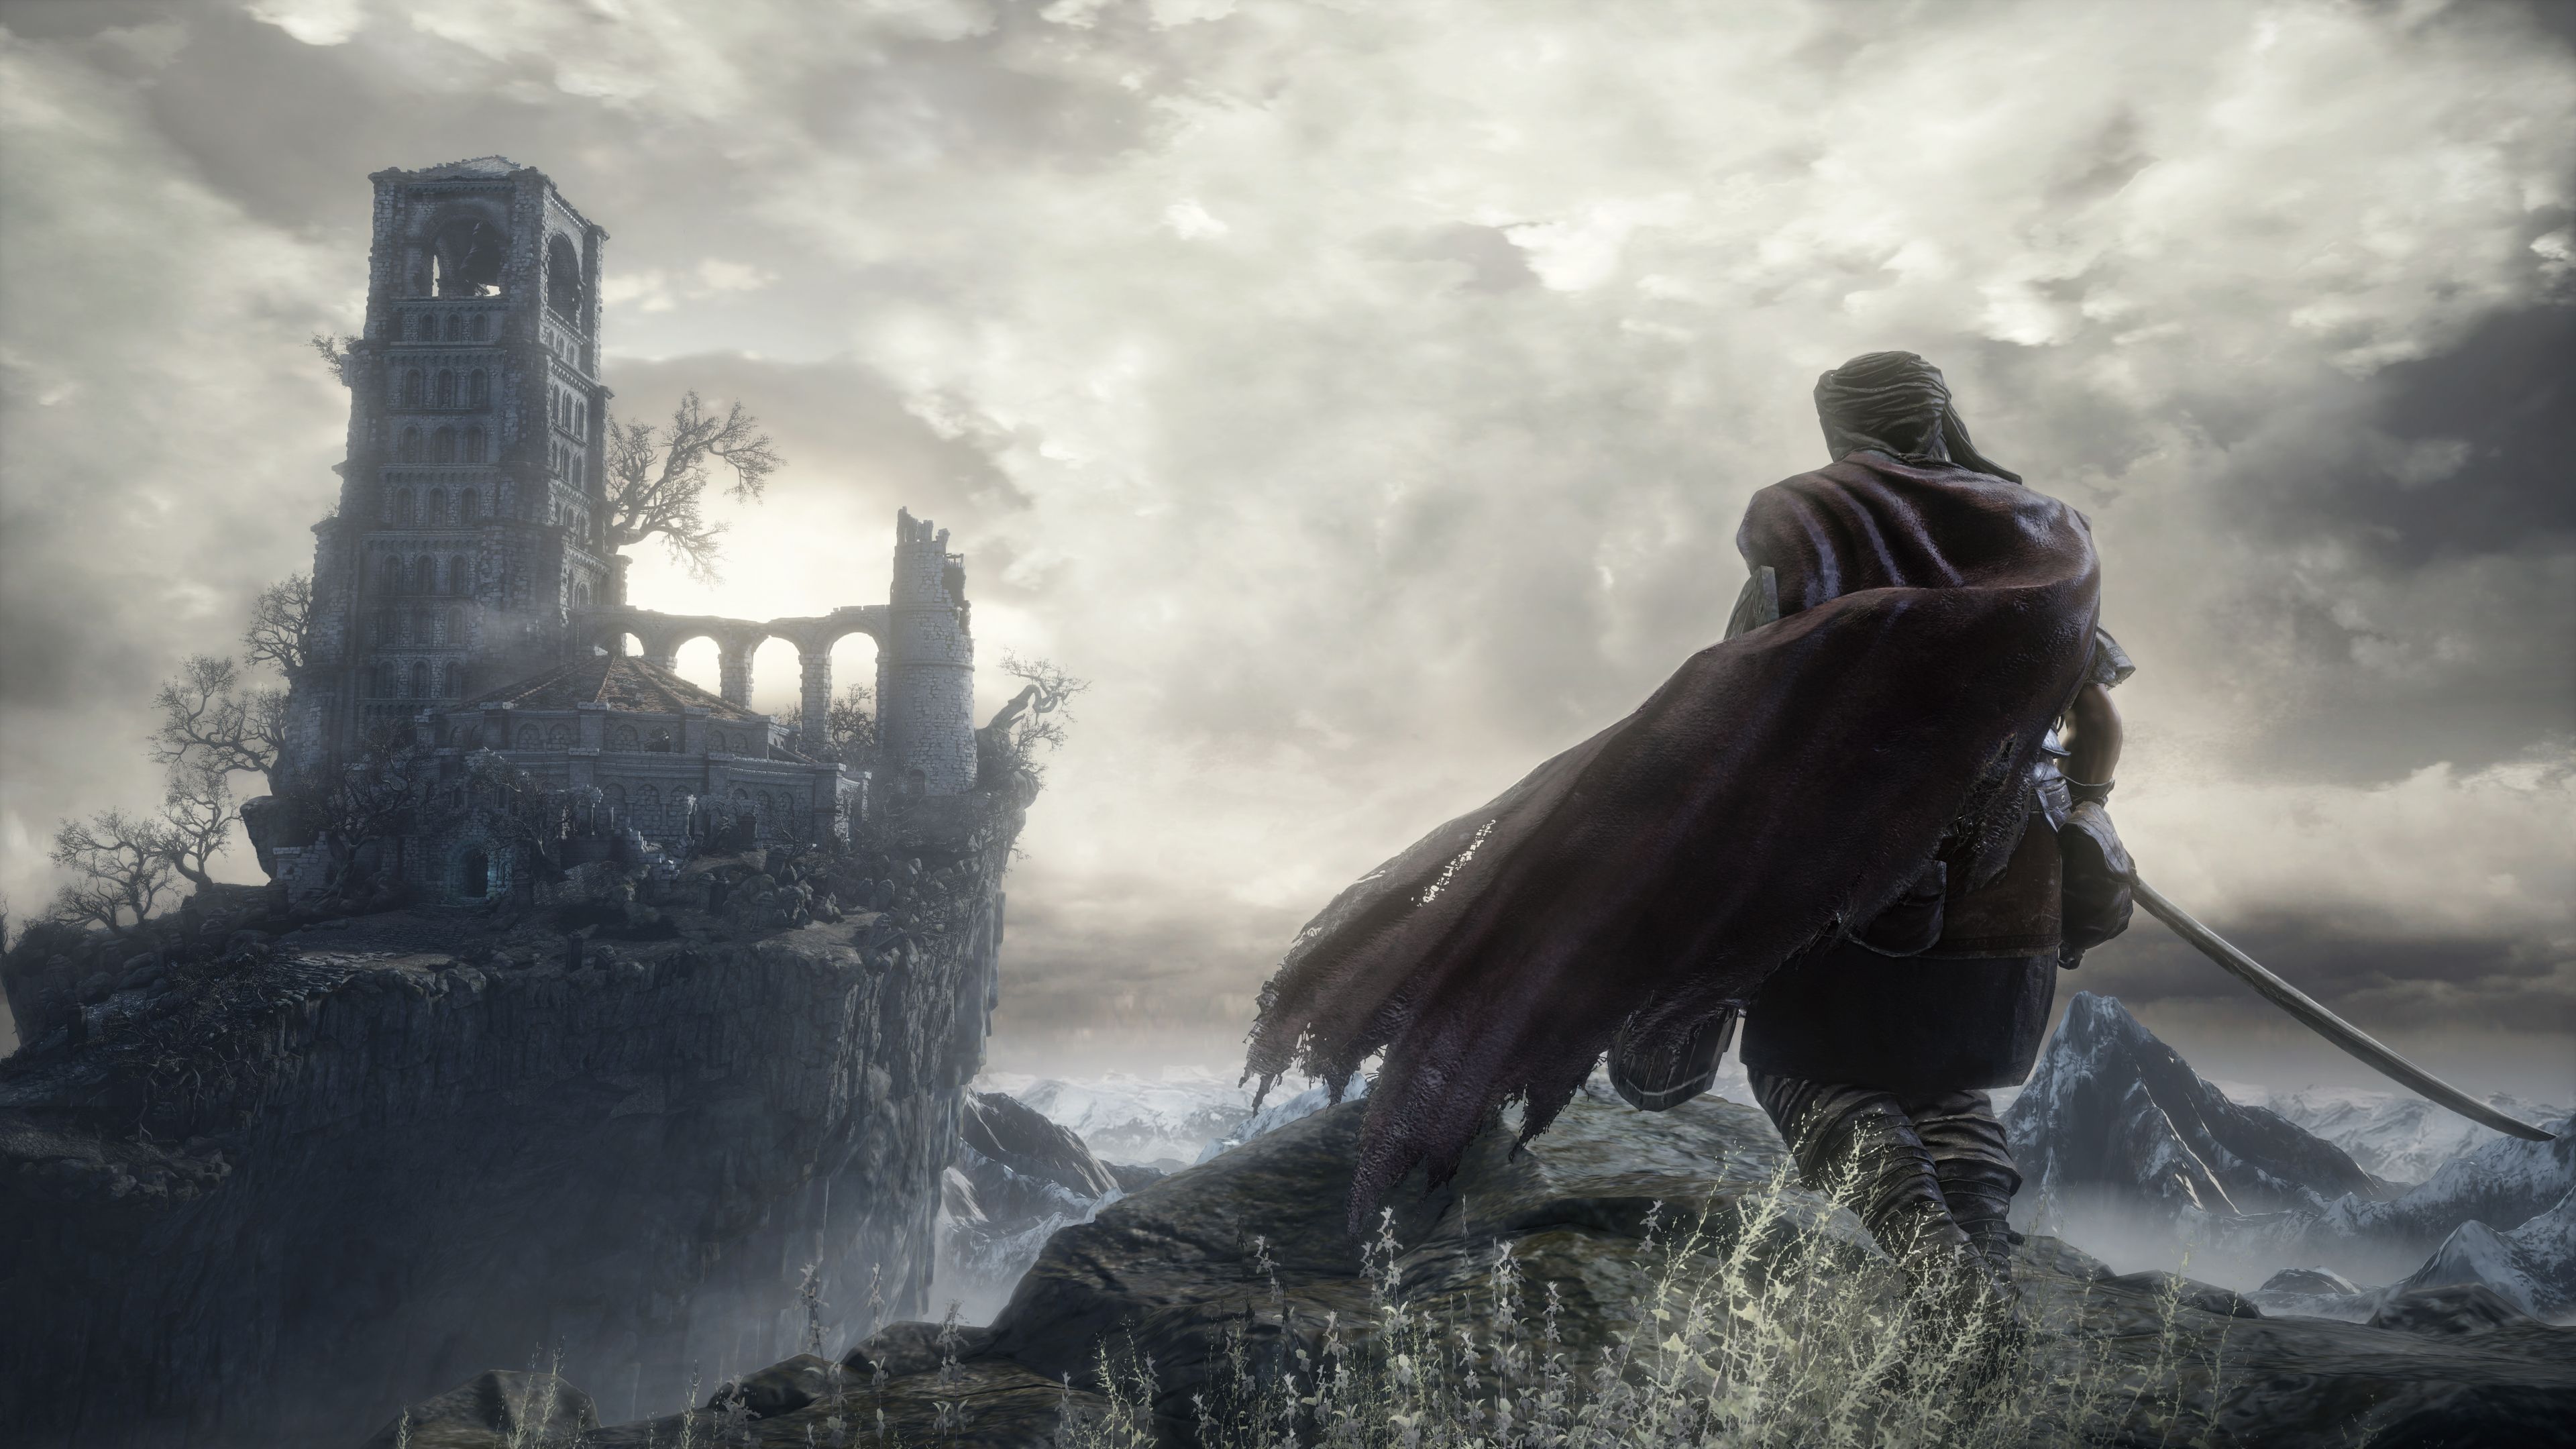 The Withered Beauty of Dark Souls III